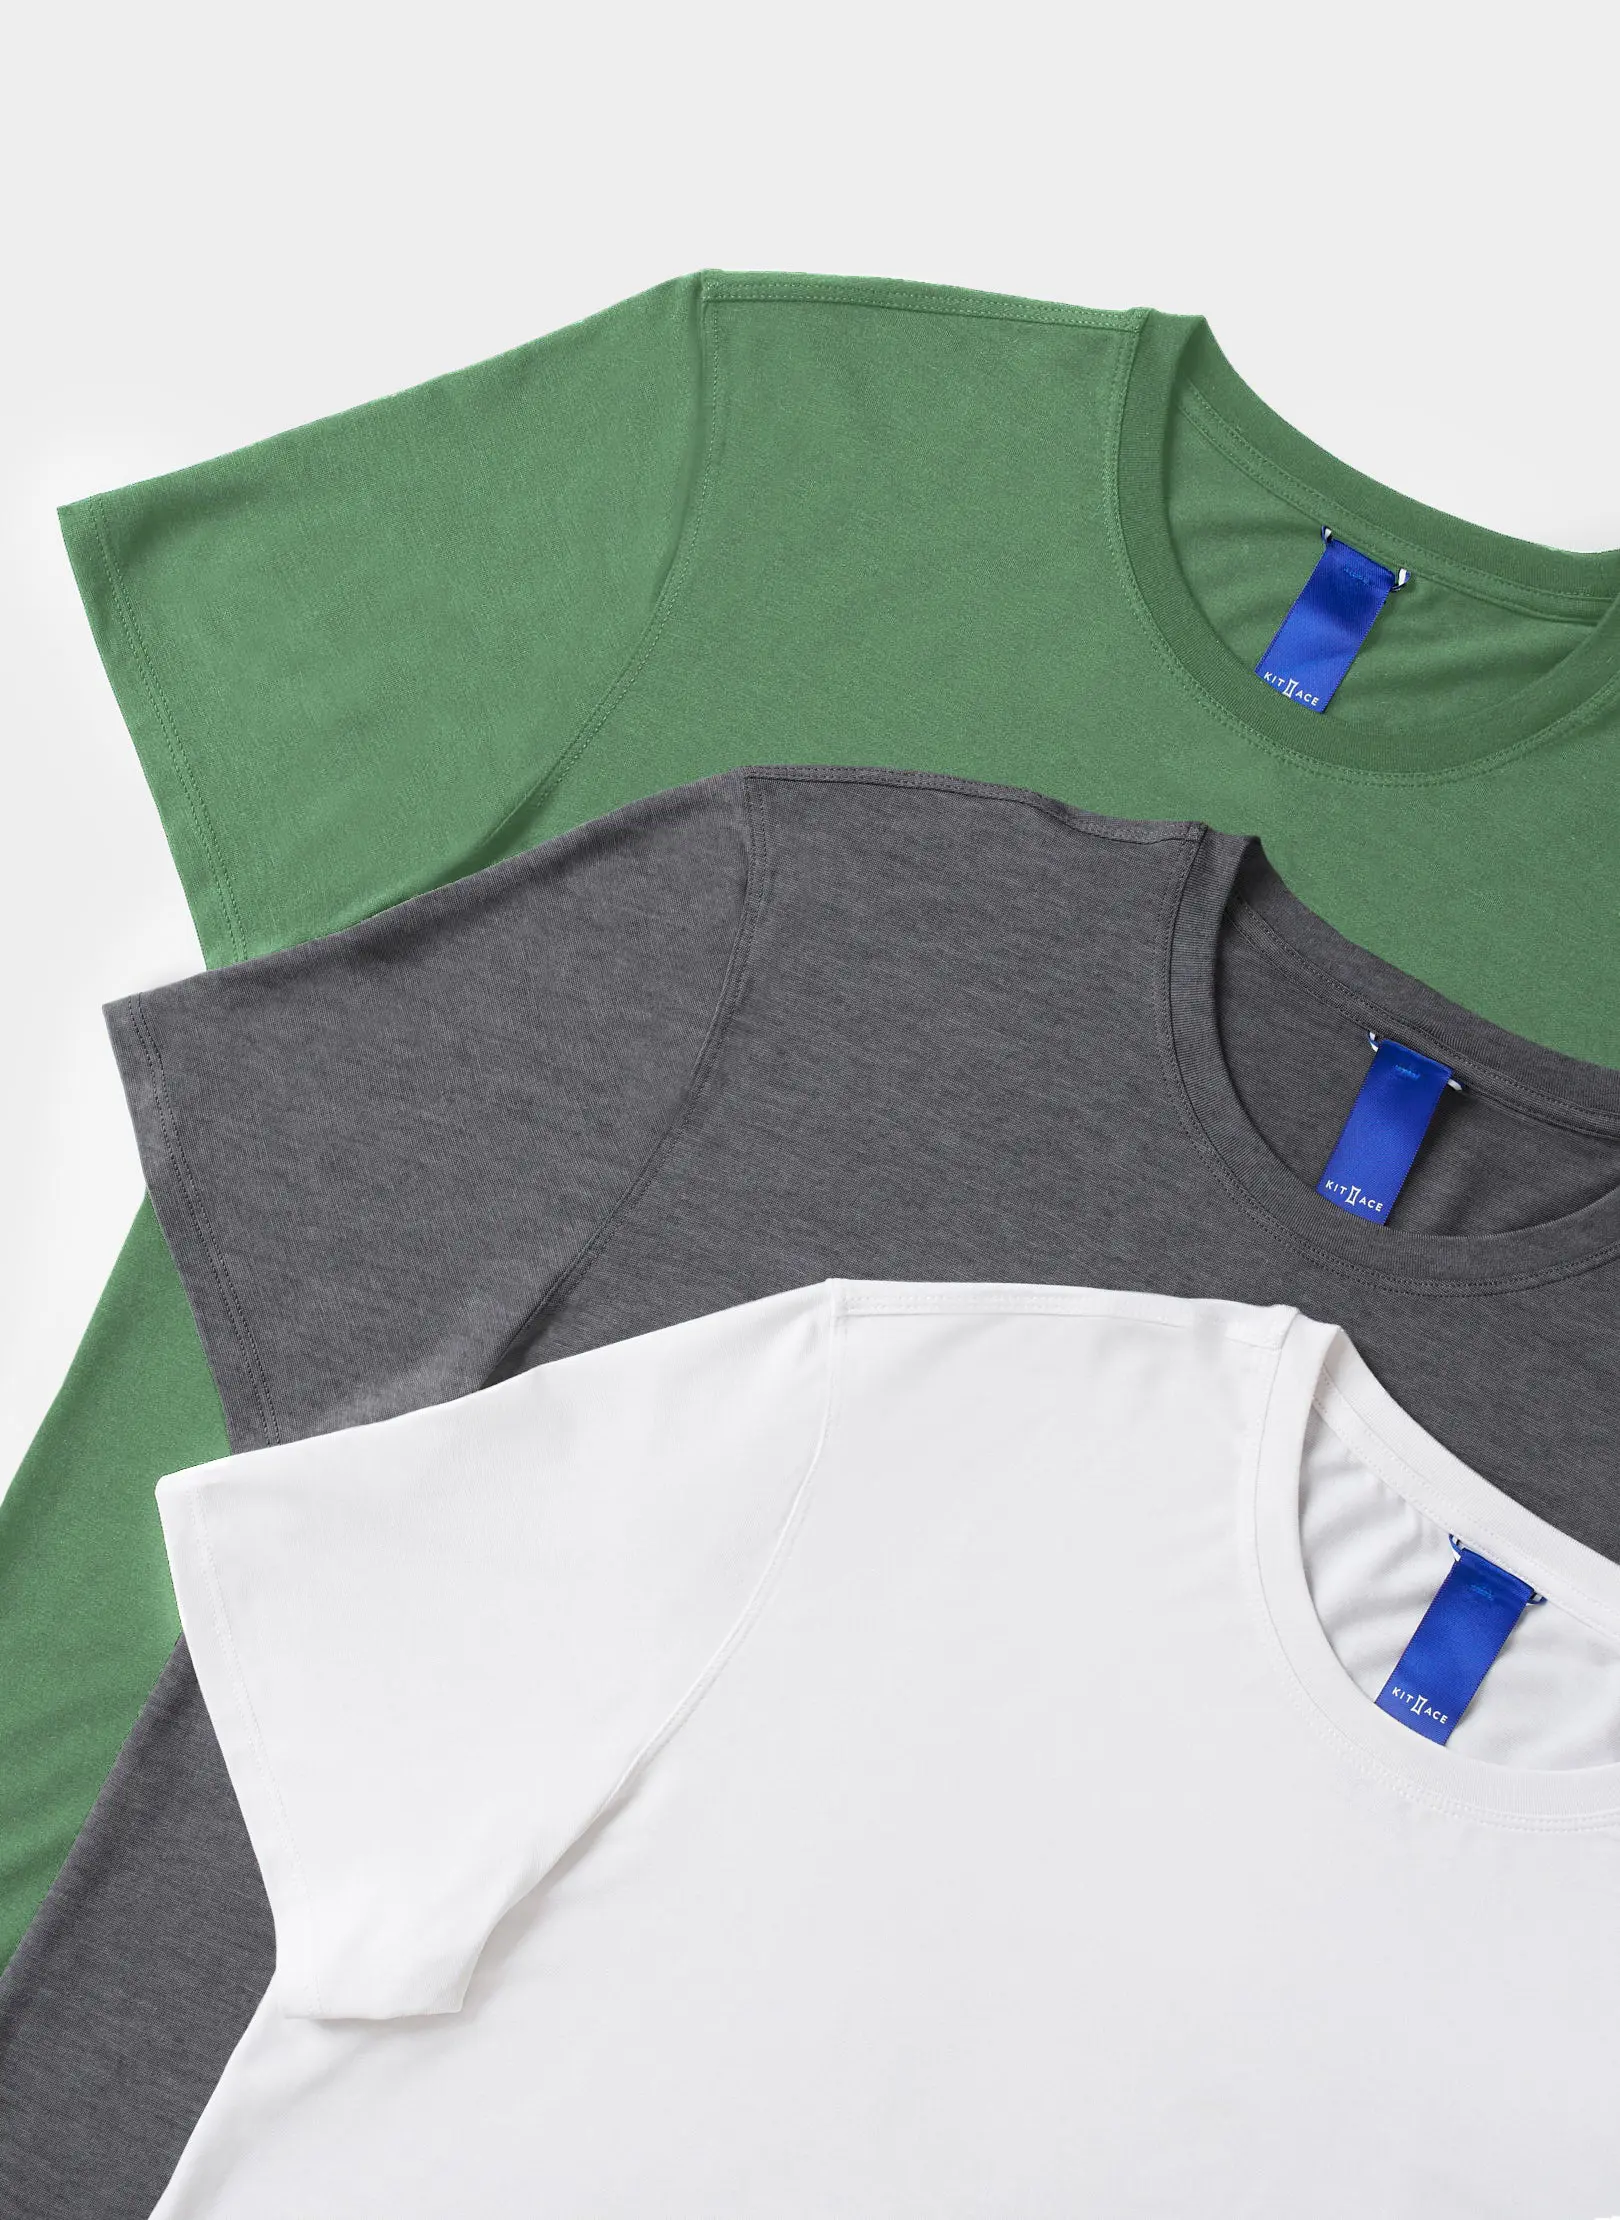 Kit And Ace Ace Crew 3 Pack Tees. 1